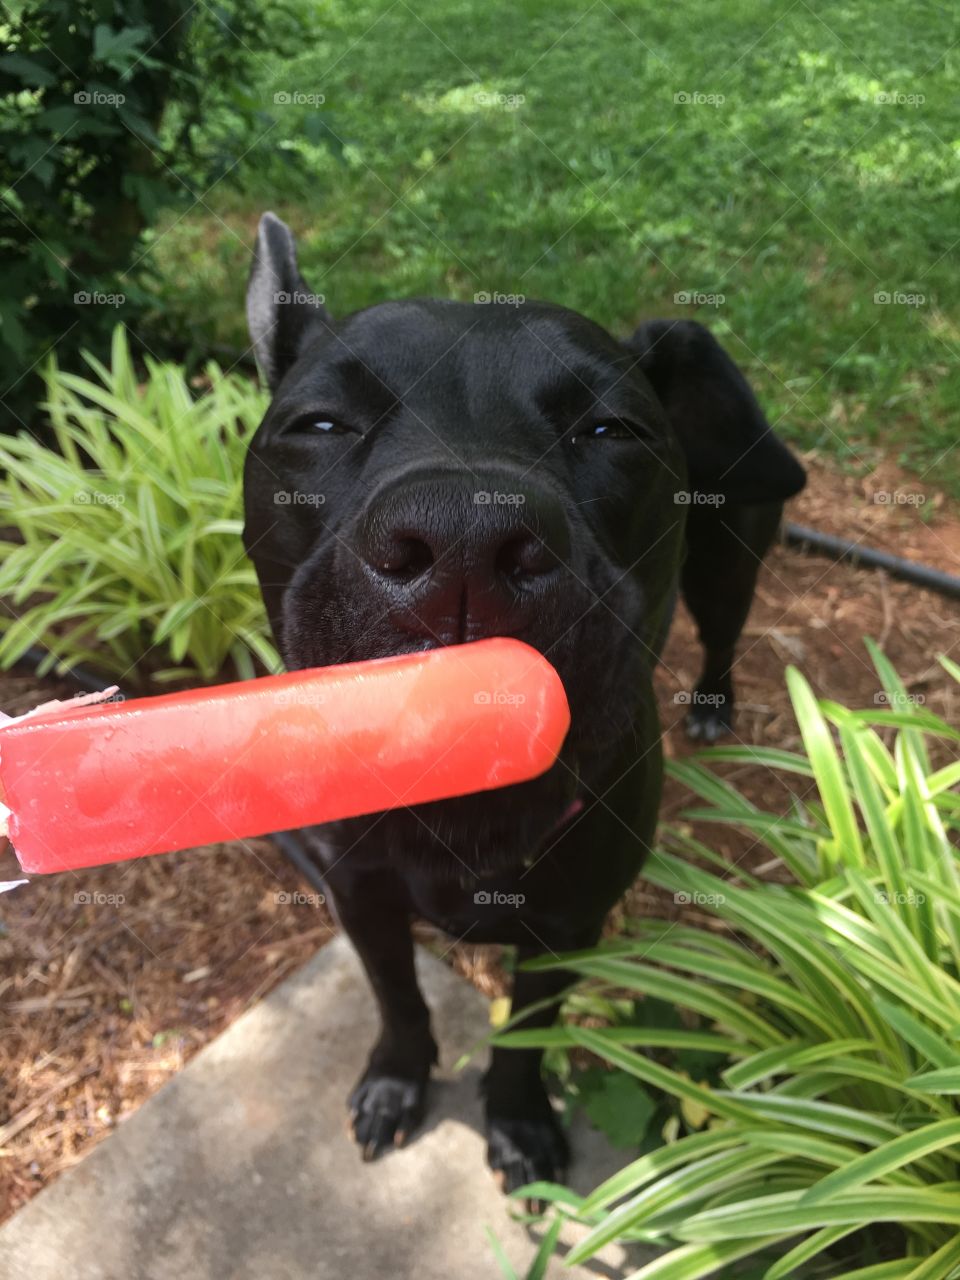 Hot days calls for popsicles 😃🍦